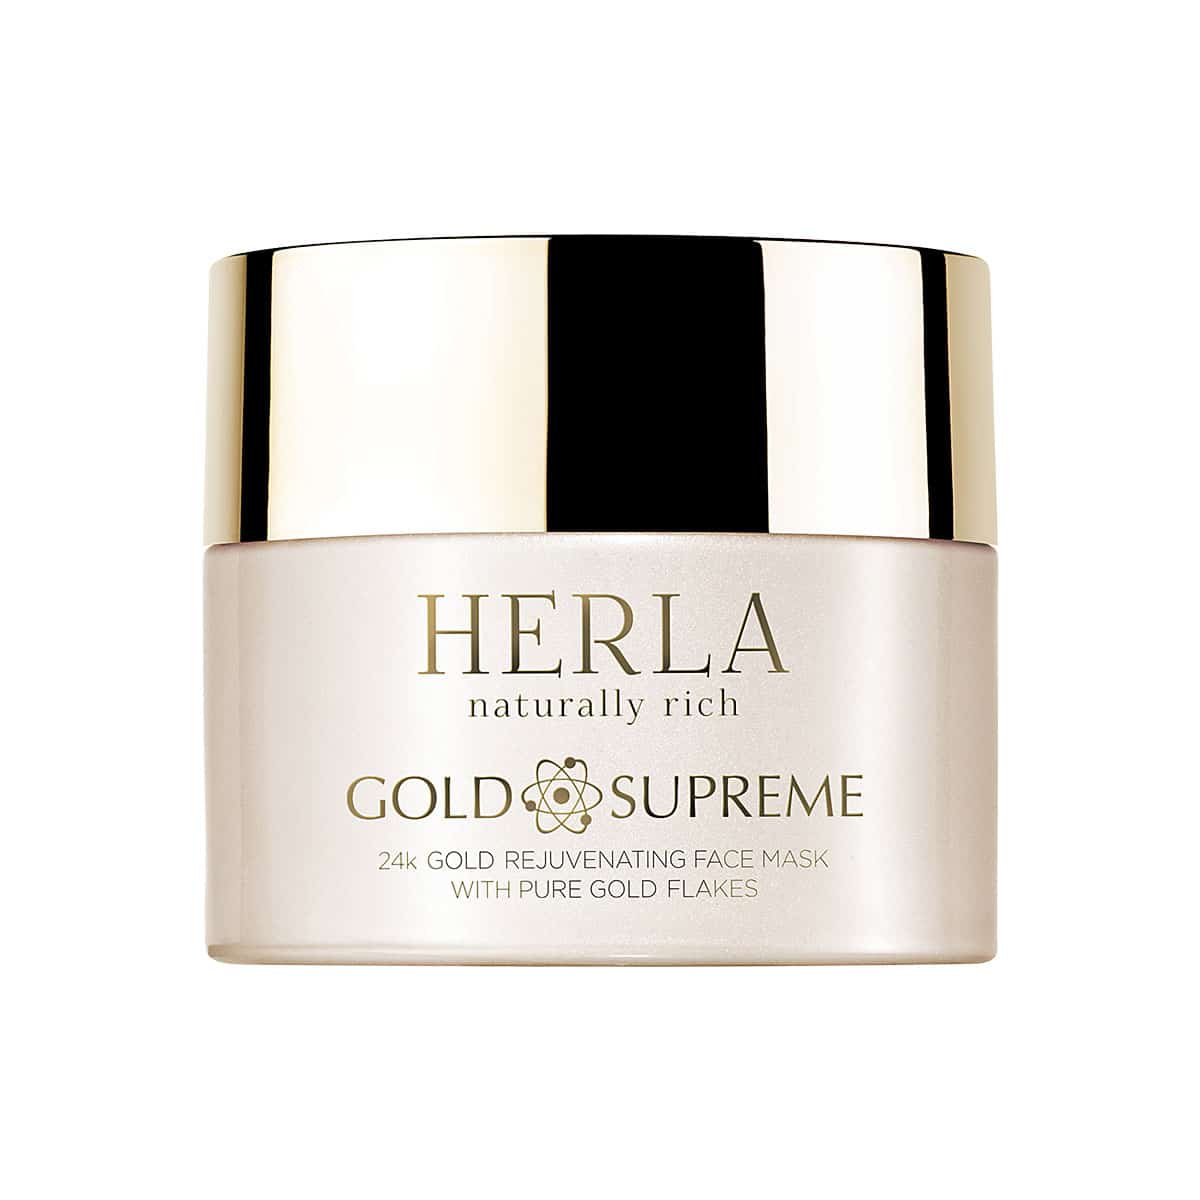 HERLA 24K Gold Rejuvenating Face Mask With Pure Gold Flakes